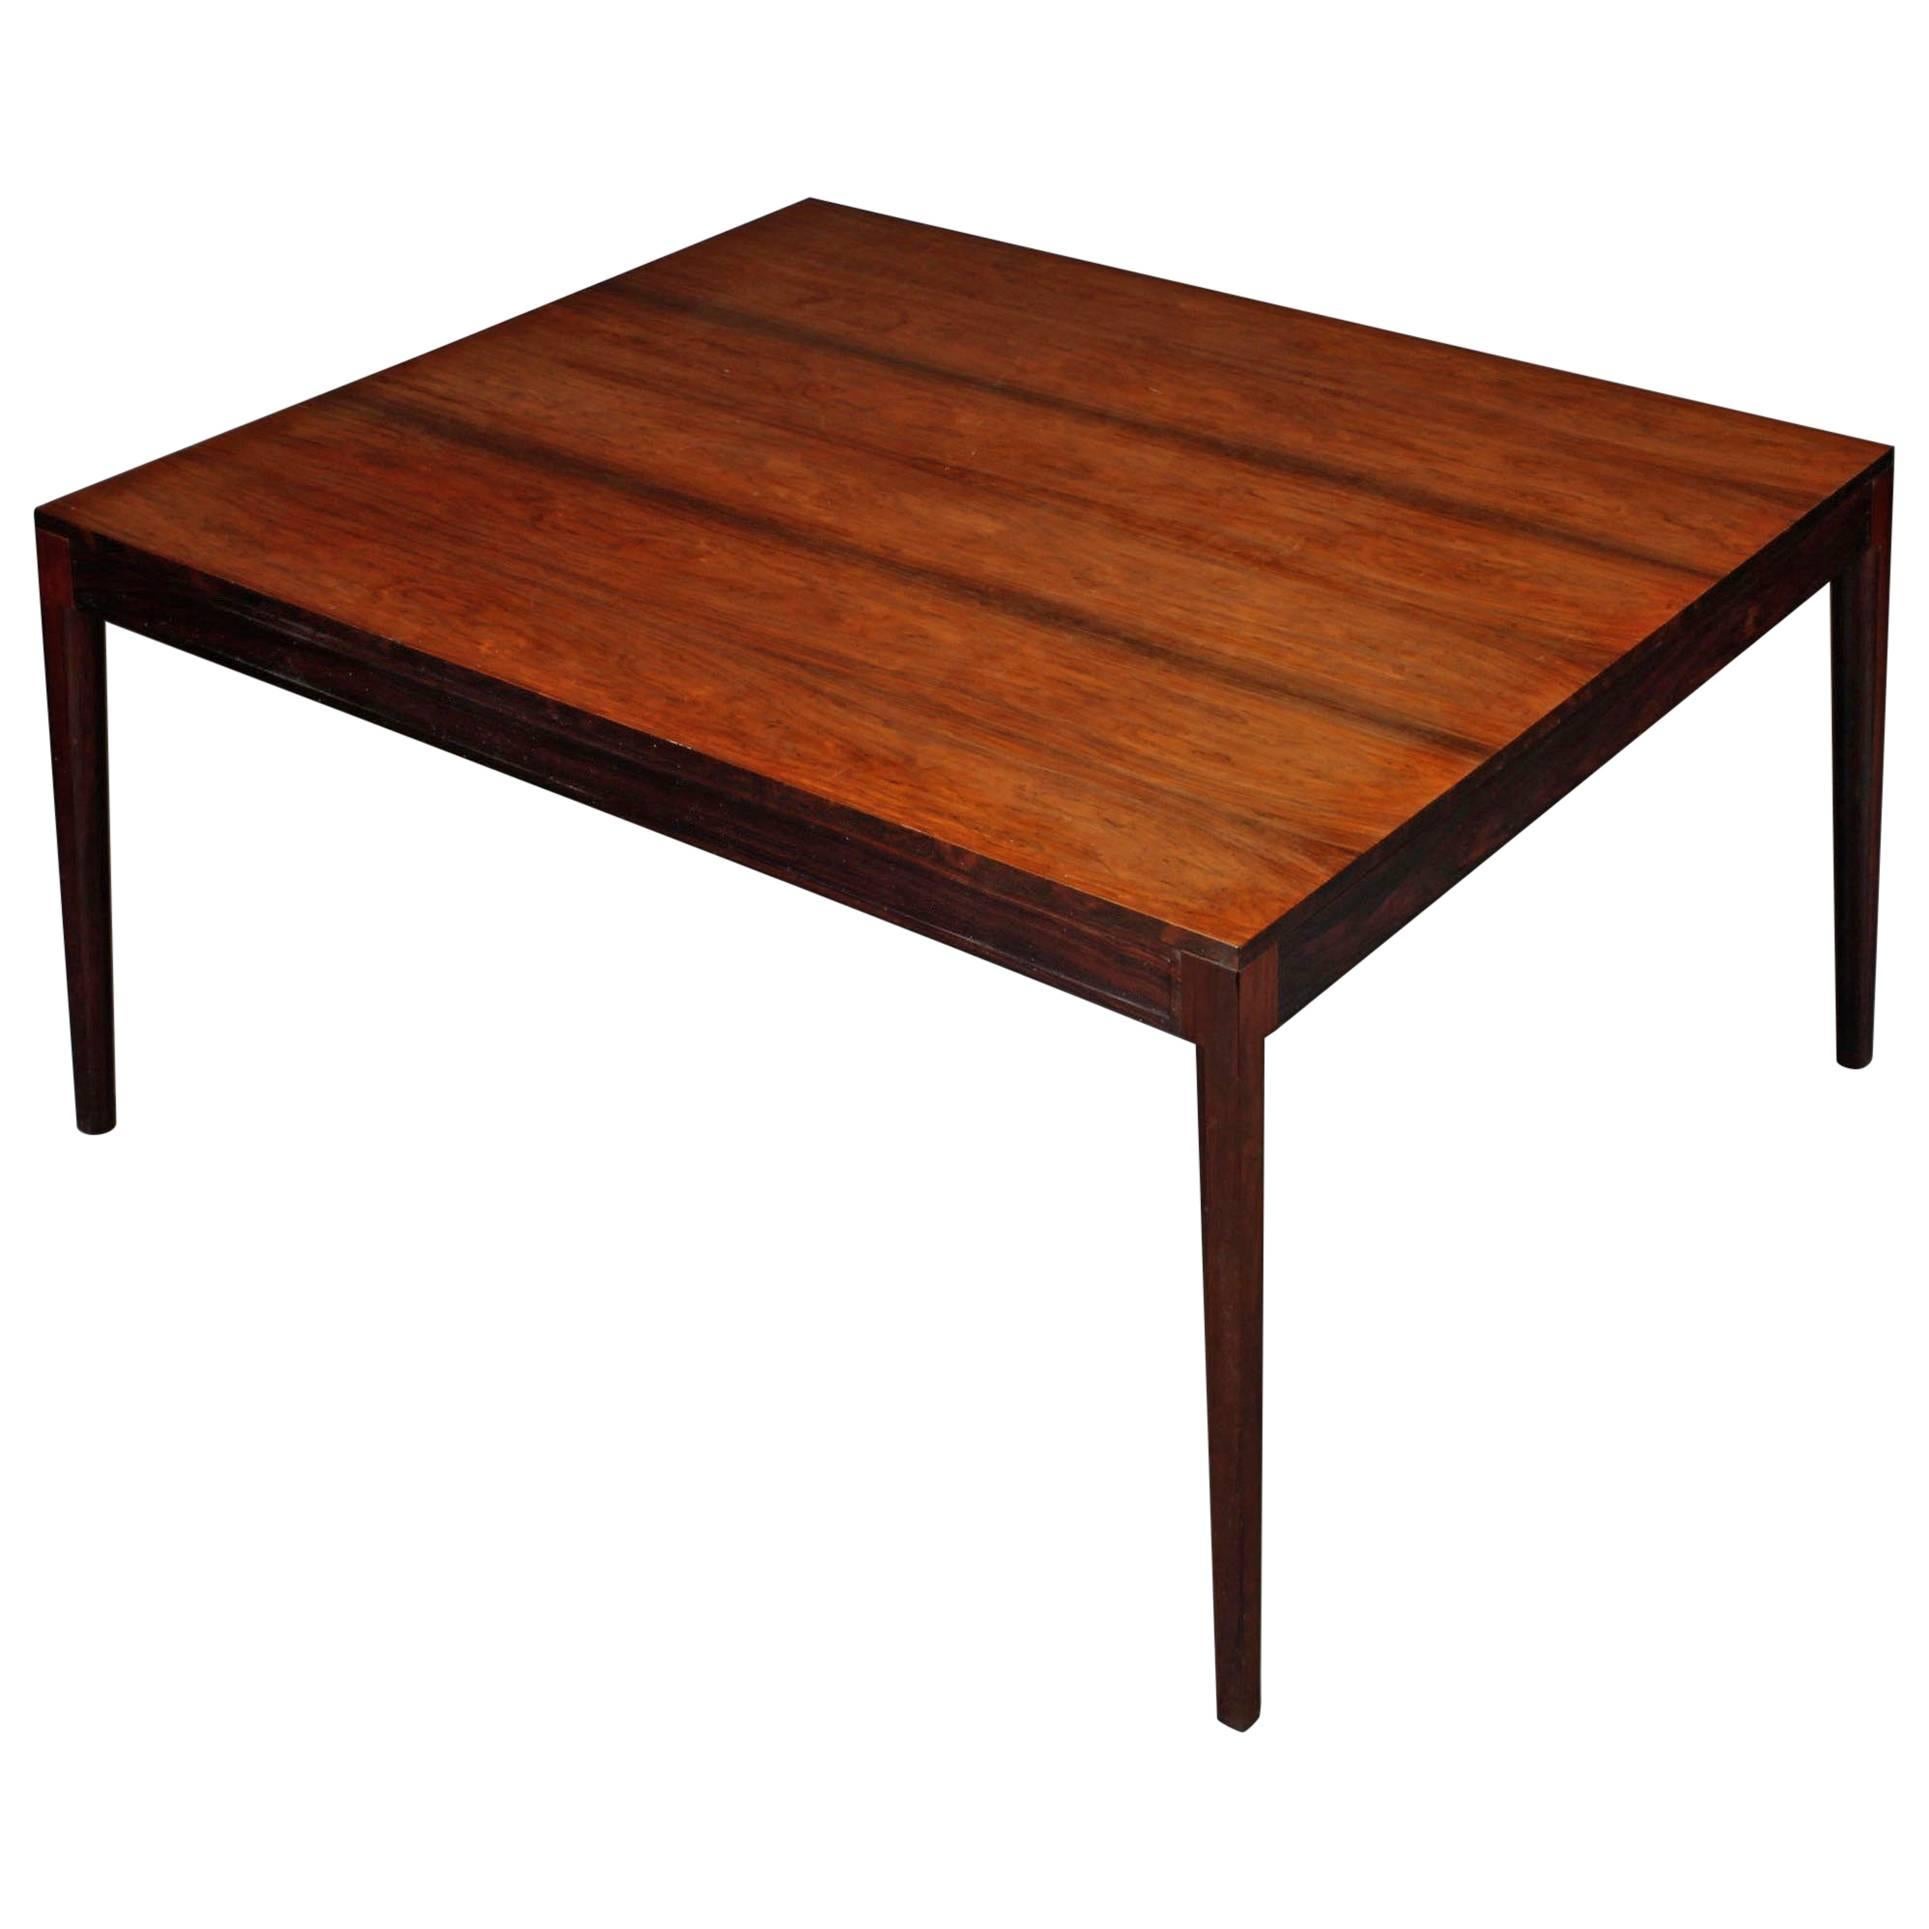 Rosewood Diplomat Desk, Conference Dining Table by Finn Juhl for CADO 1960 For Sale